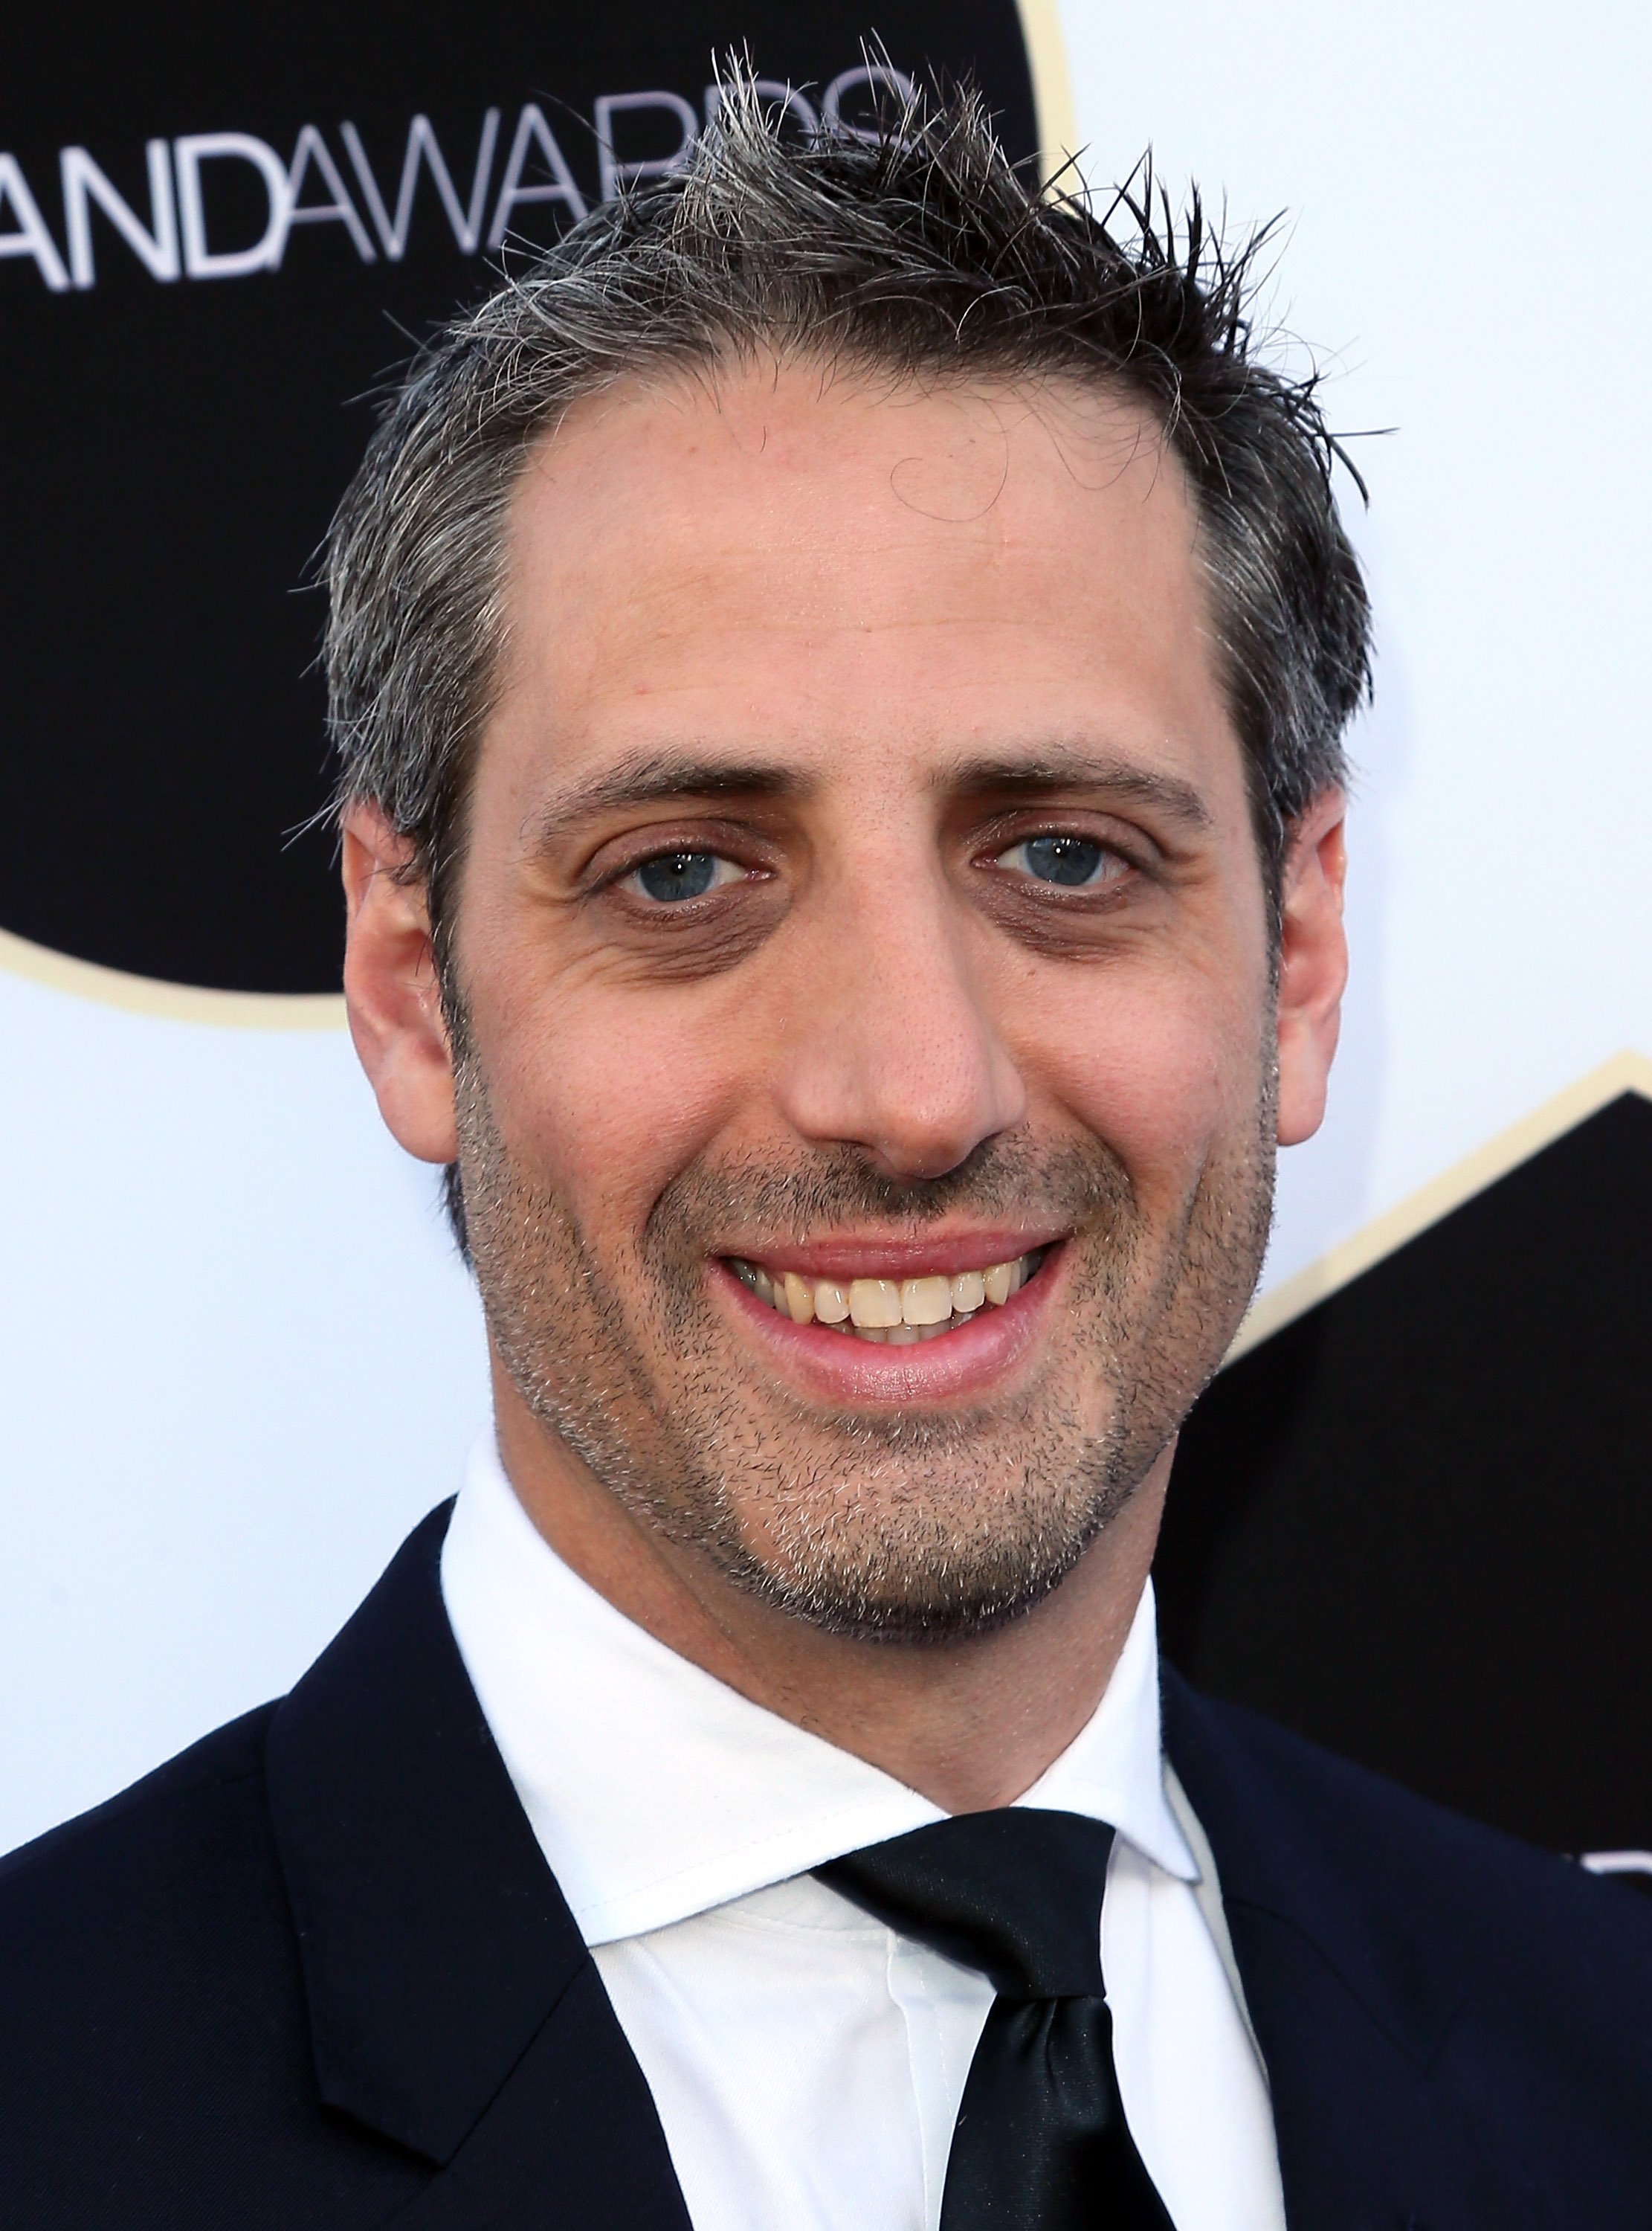 Josh Saviano poses for a photo after arriving at the 2015 TV Land Awards in Beverly Hills, California